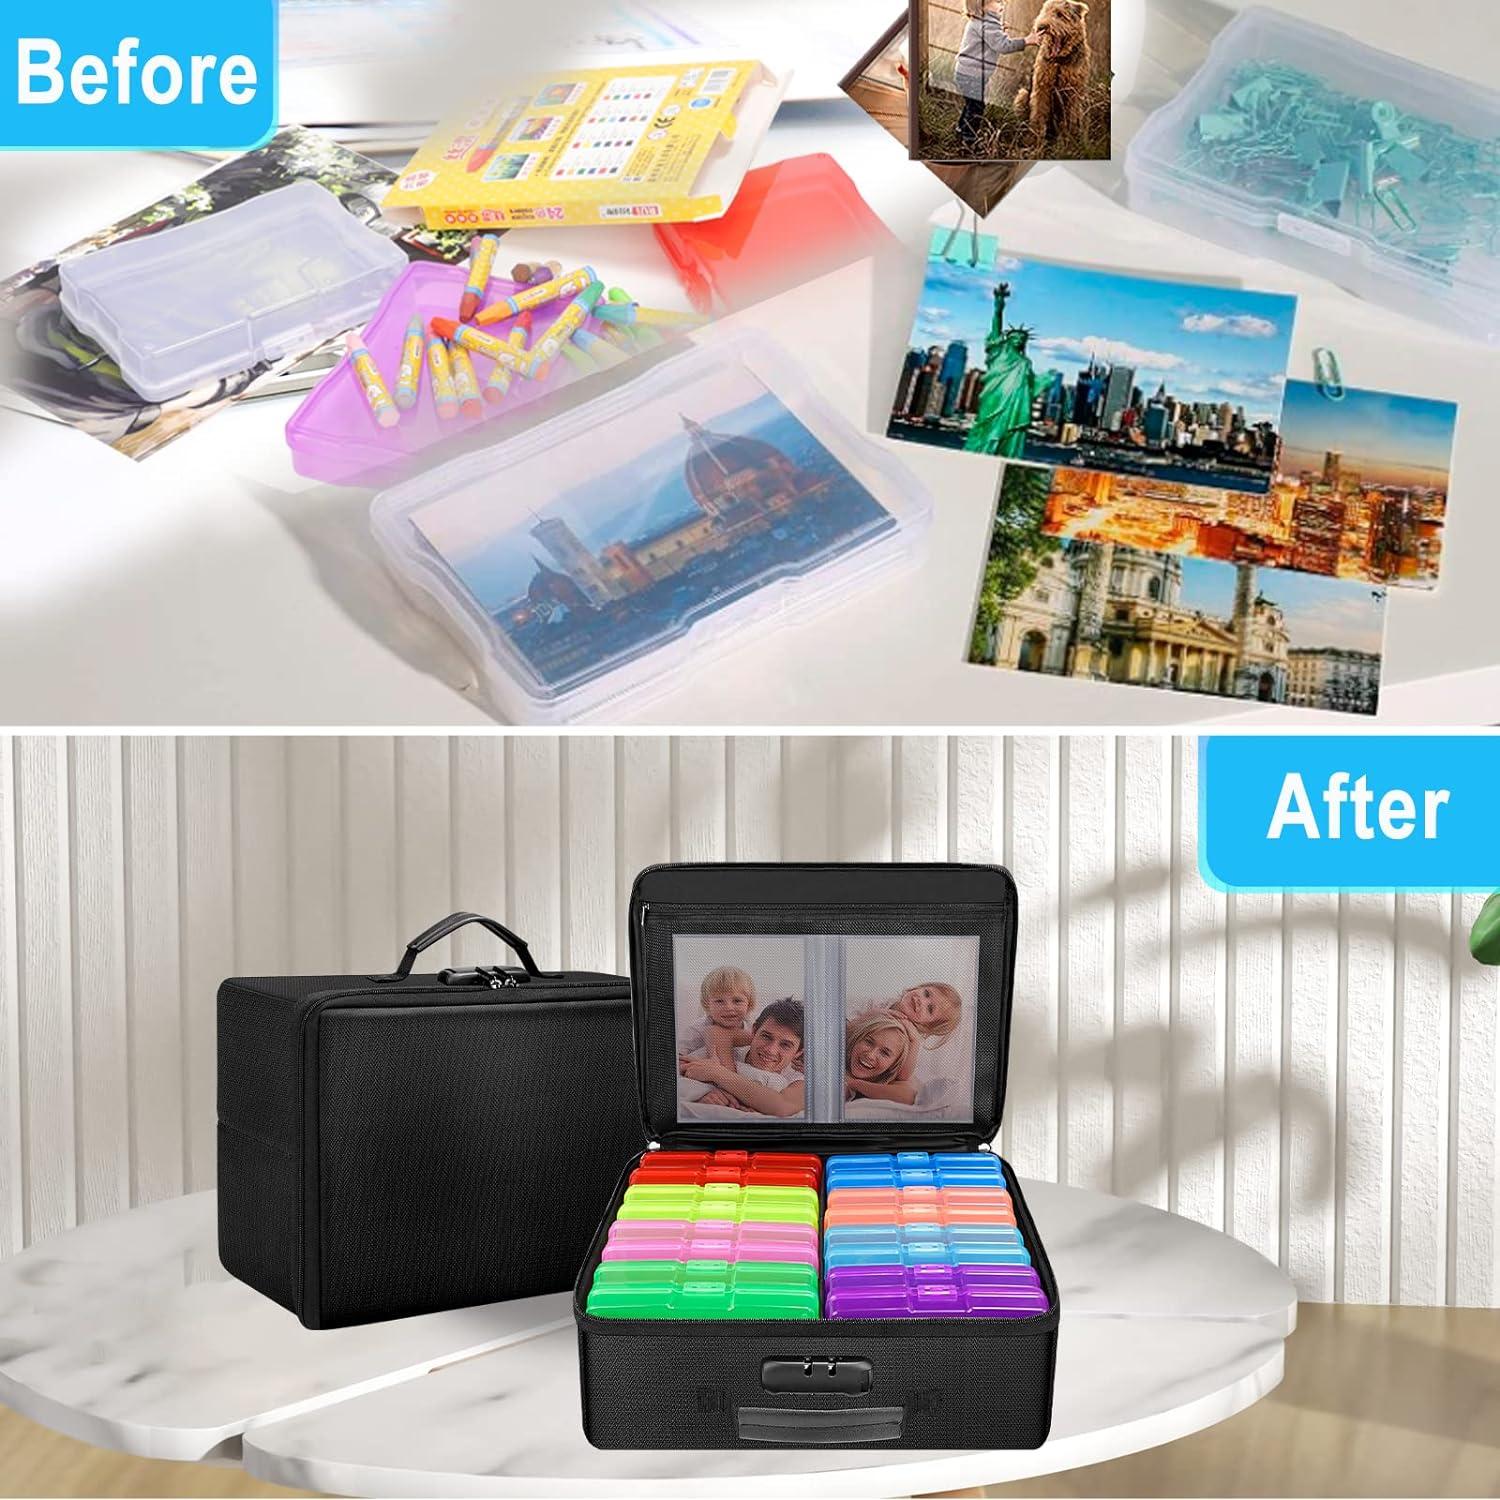 ENGPOW Fireproof Photo Storage Box with 16 Inner 4 x 6 Photo  Cases(Multi-Colored) Photo Organizer Box with Lock Collapsible Portable Photo  Storage Containers with Handle for Photos Picture Craft Box+16 Colored 4